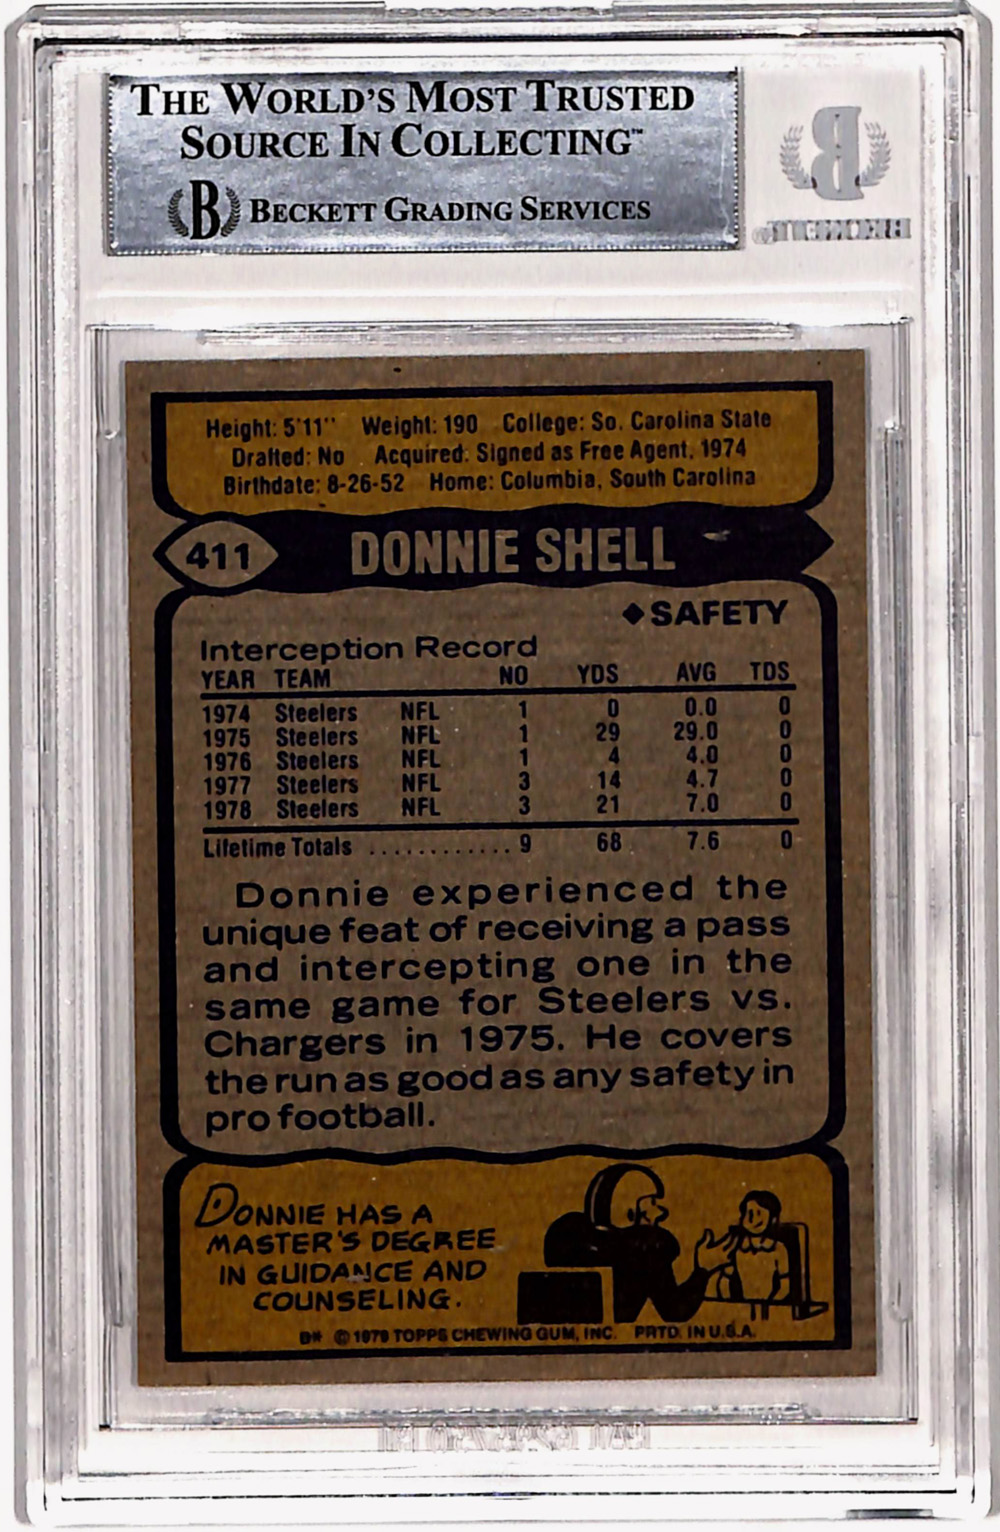 Donnie Shell Signed 1979 Topps #411 Rookie Card HOF Beckett Slab